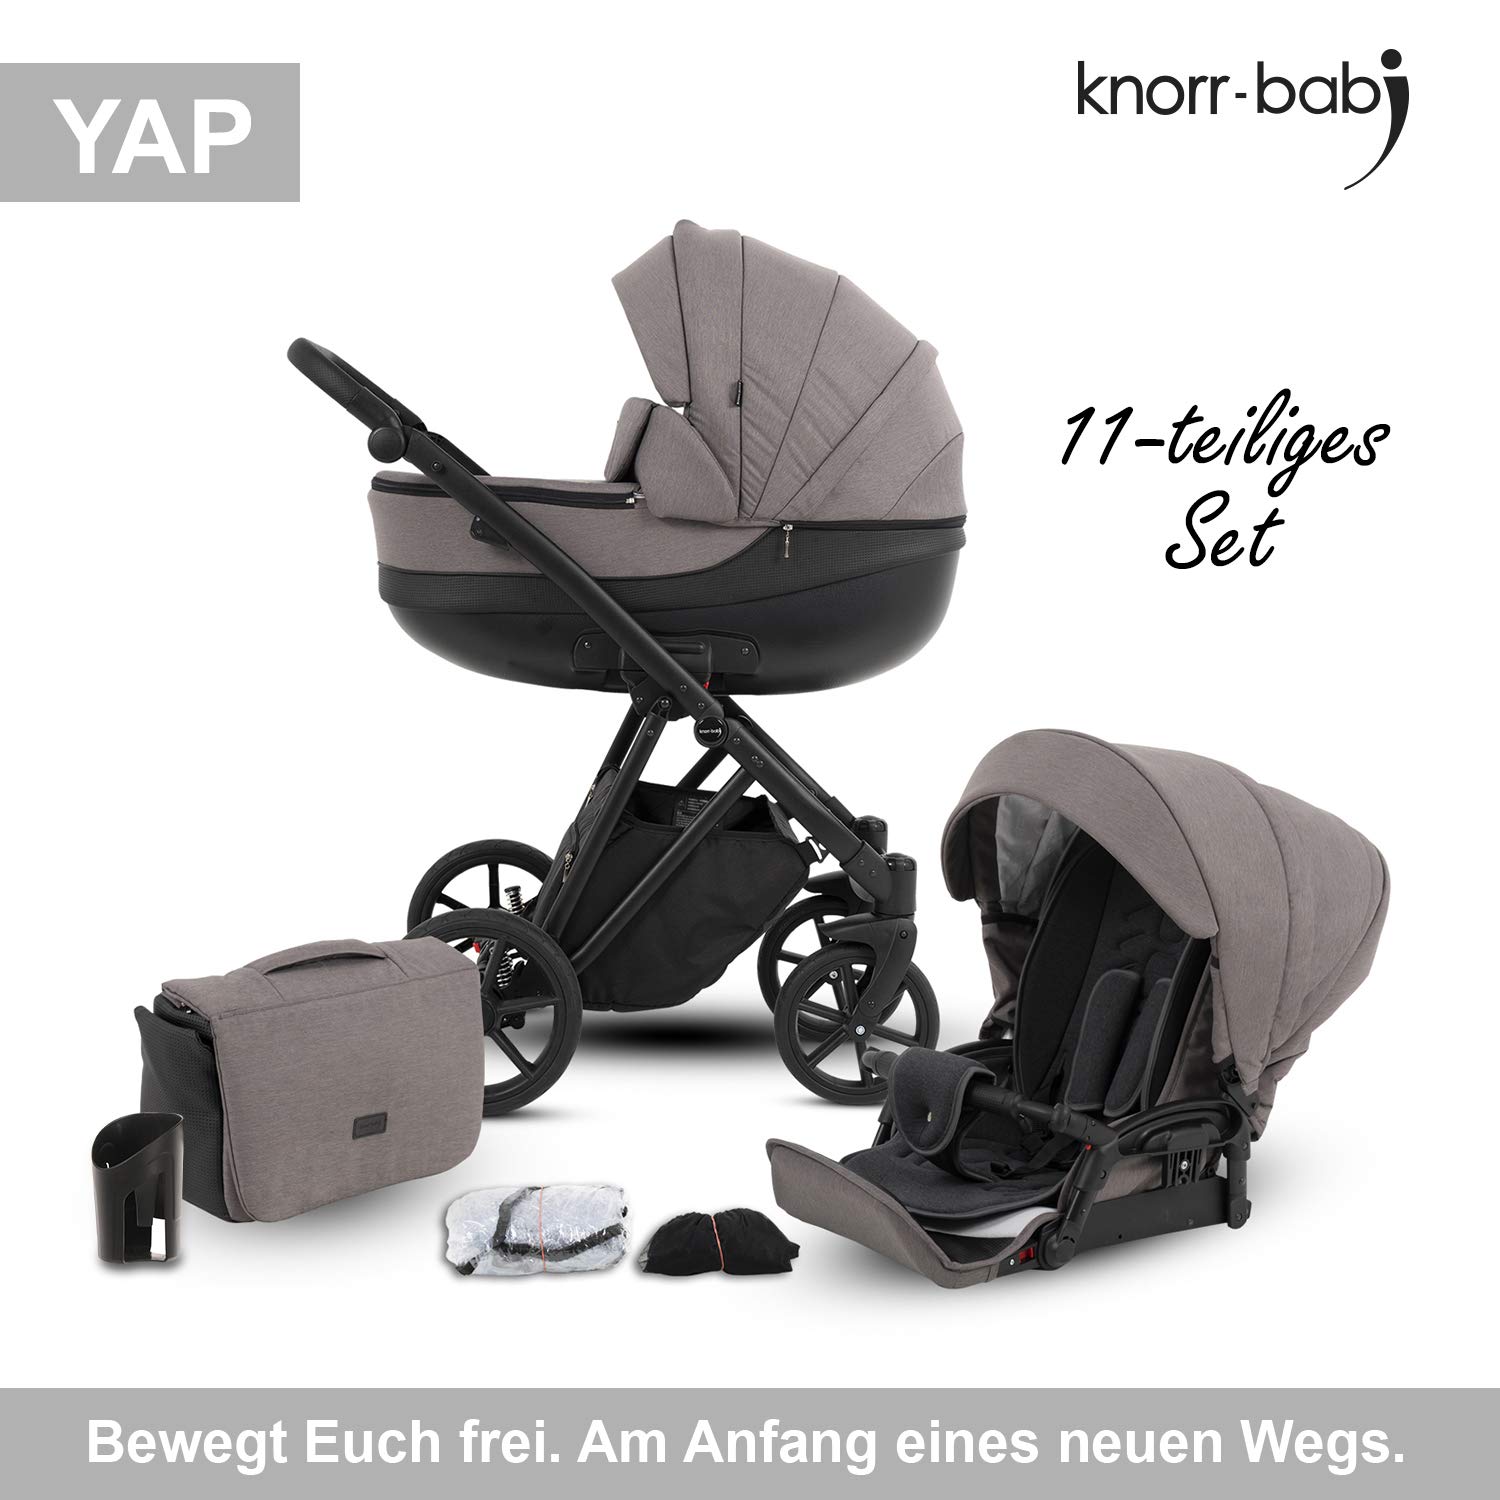 Knorr-Baby YAP Combination Pushchair taupe